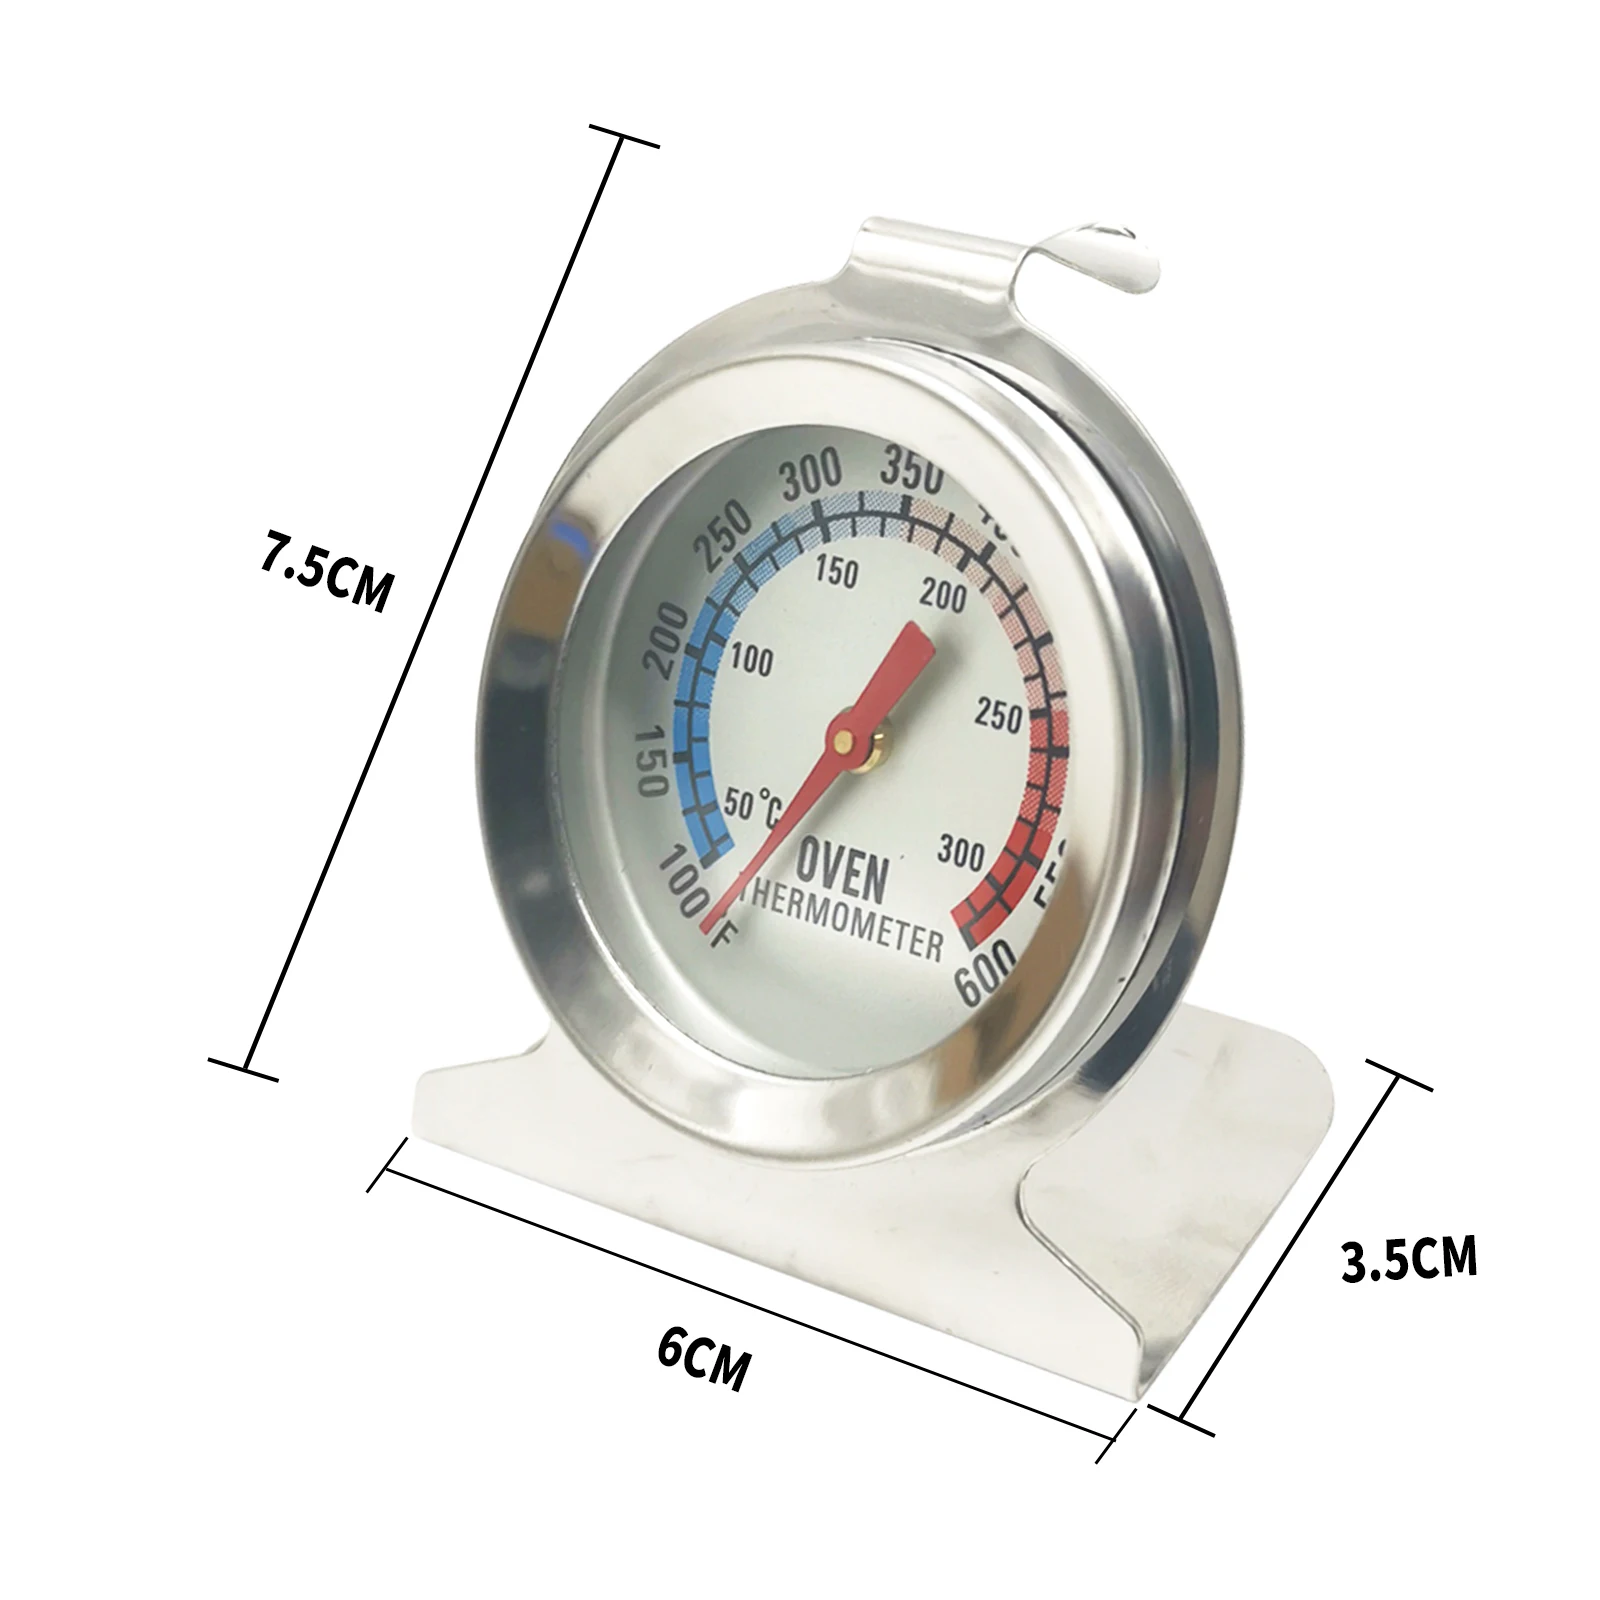 https://ae01.alicdn.com/kf/Sfa70aec5666345fb9abebc09800d425aM/Stainless-Steel-Oven-Thermometer-Baking-Tool-High-Temperature-Microwave-Oven-Holder-Kitchen-Cooker-Baking-Supplies.jpg